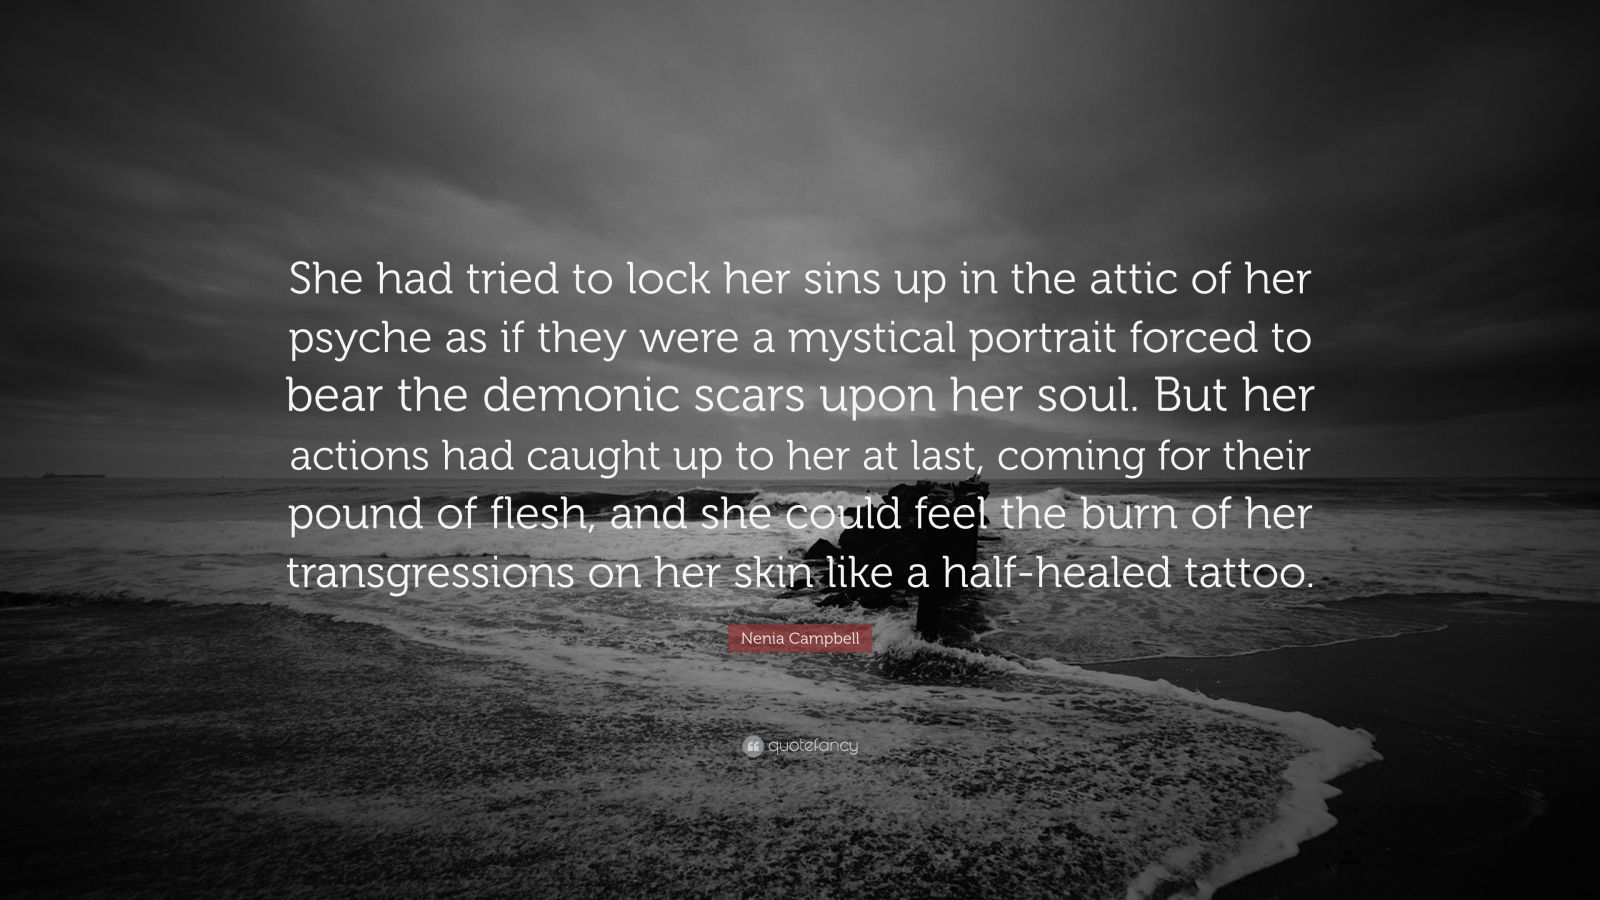 Nenia Campbell Quote: “She had tried to lock her sins up in the attic ...